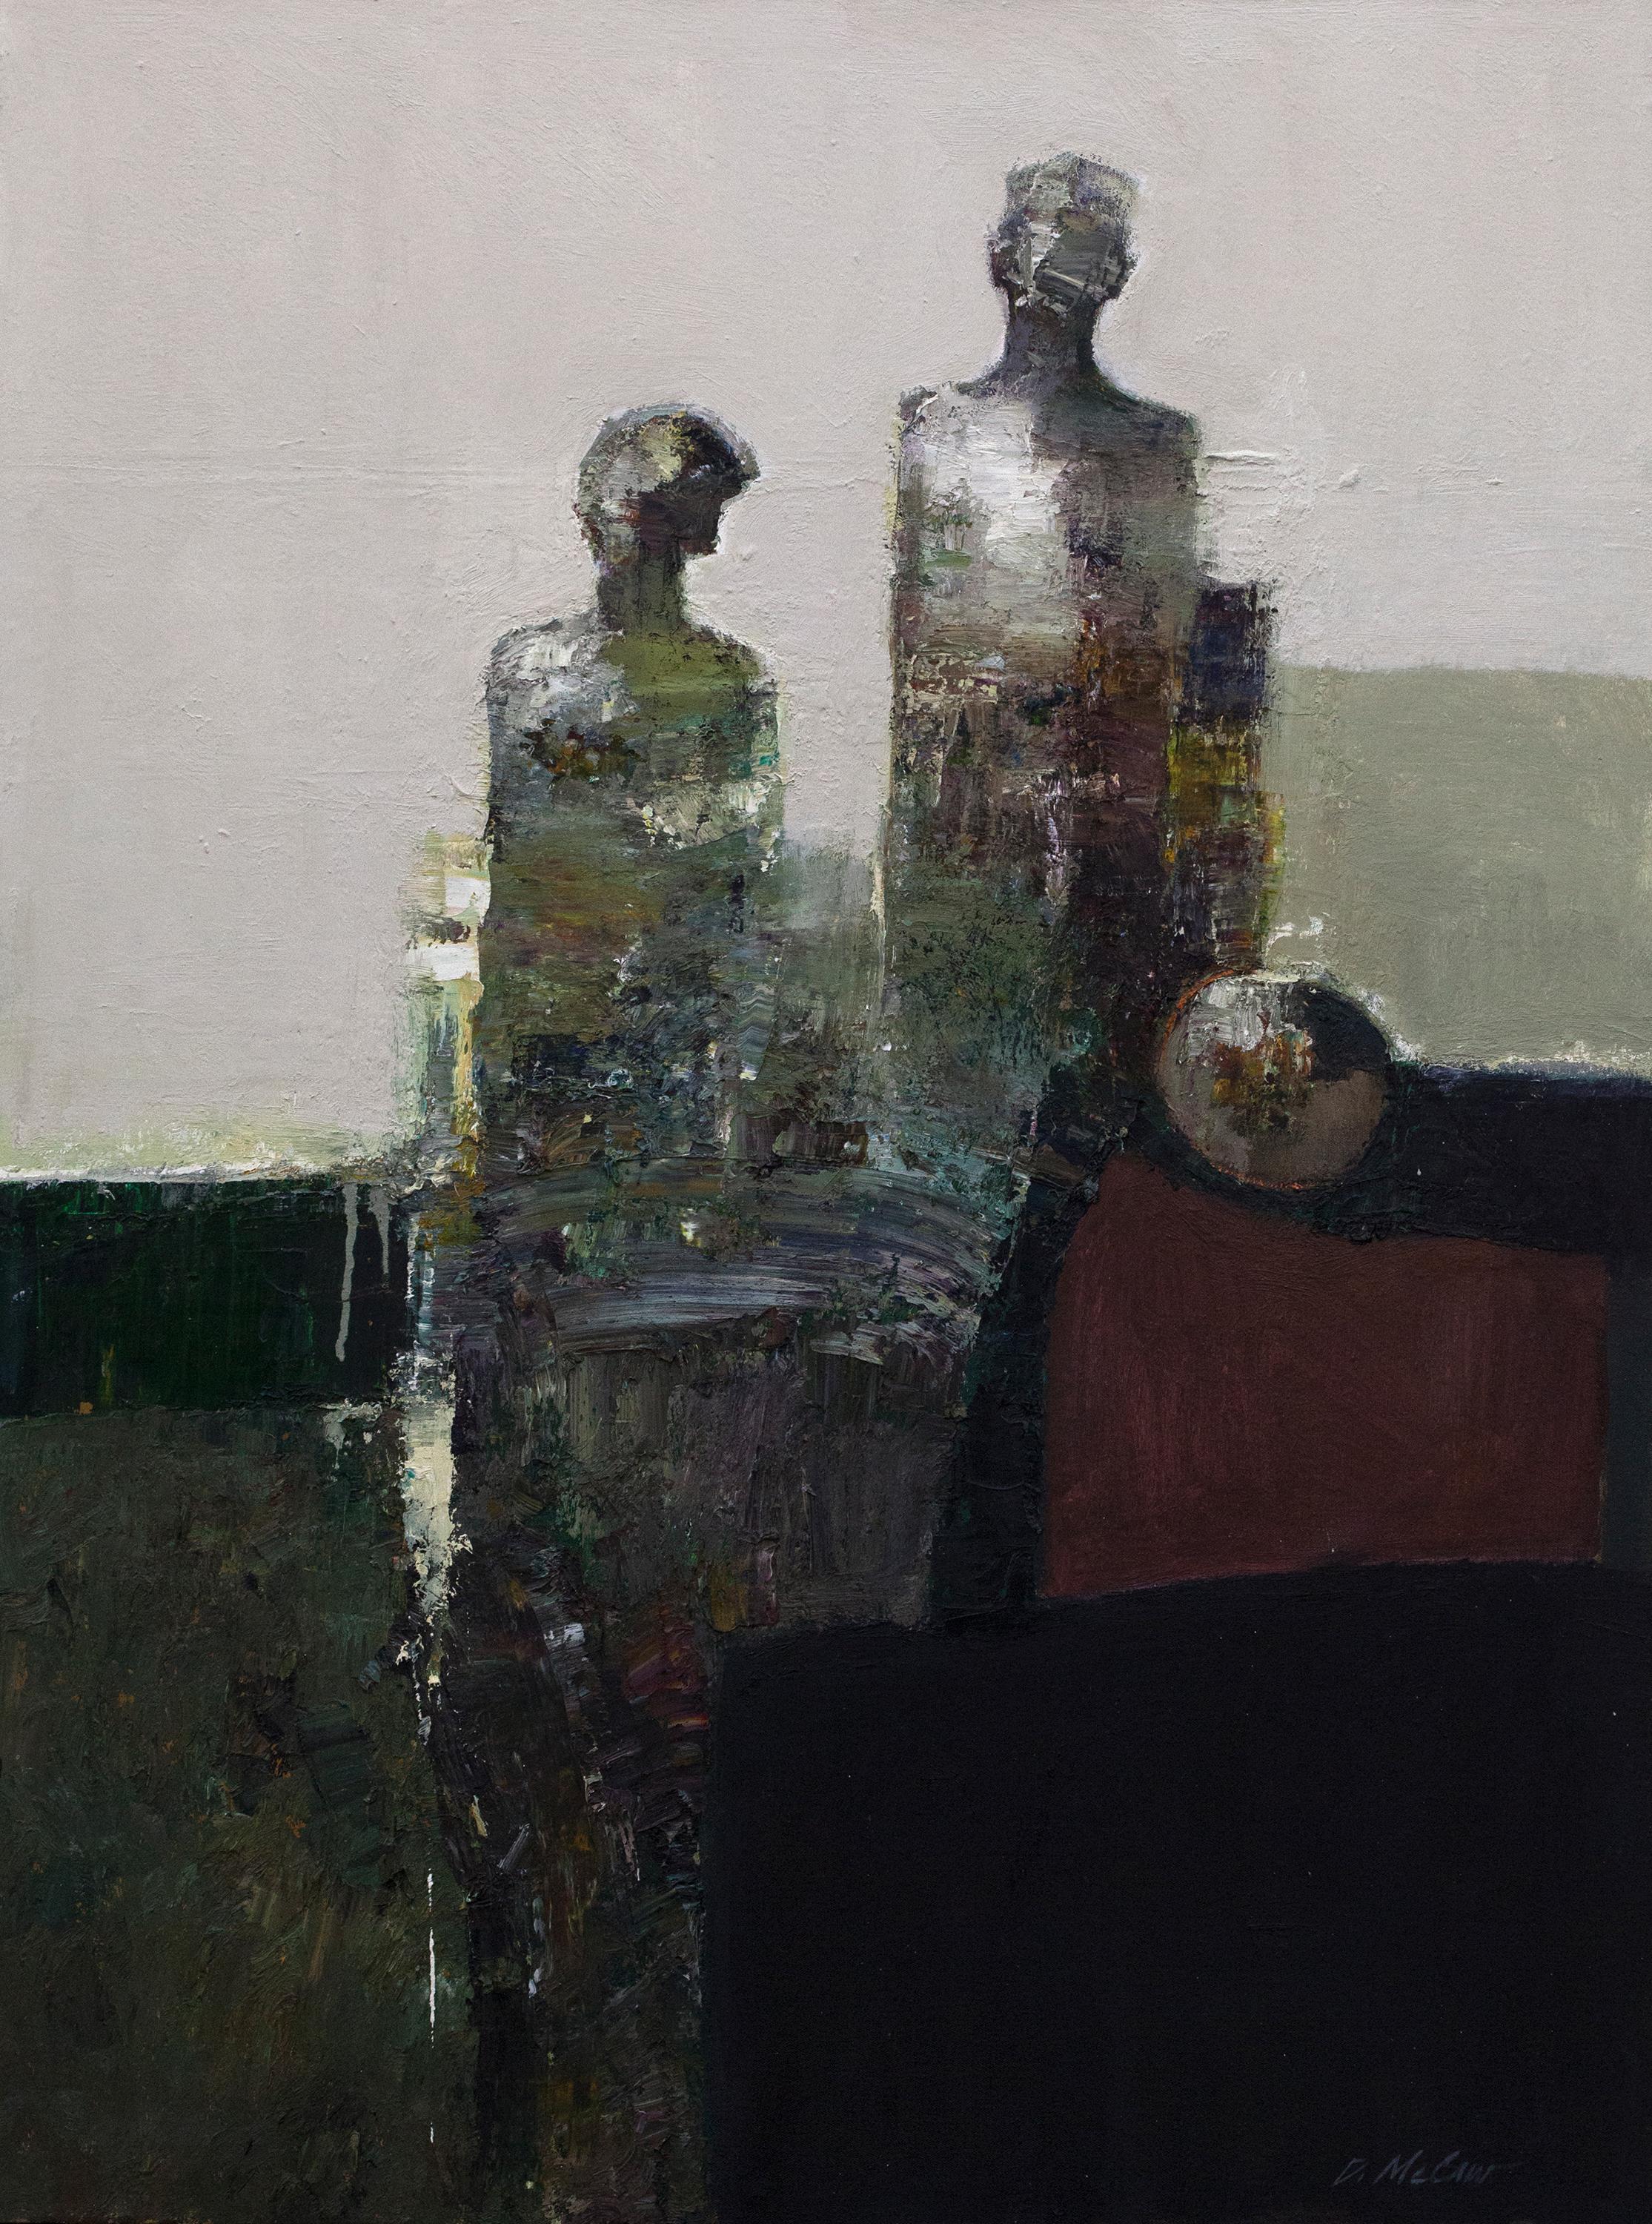 Dan McCaw Figurative Painting - "Observation" 48" x 36" Oil Painting